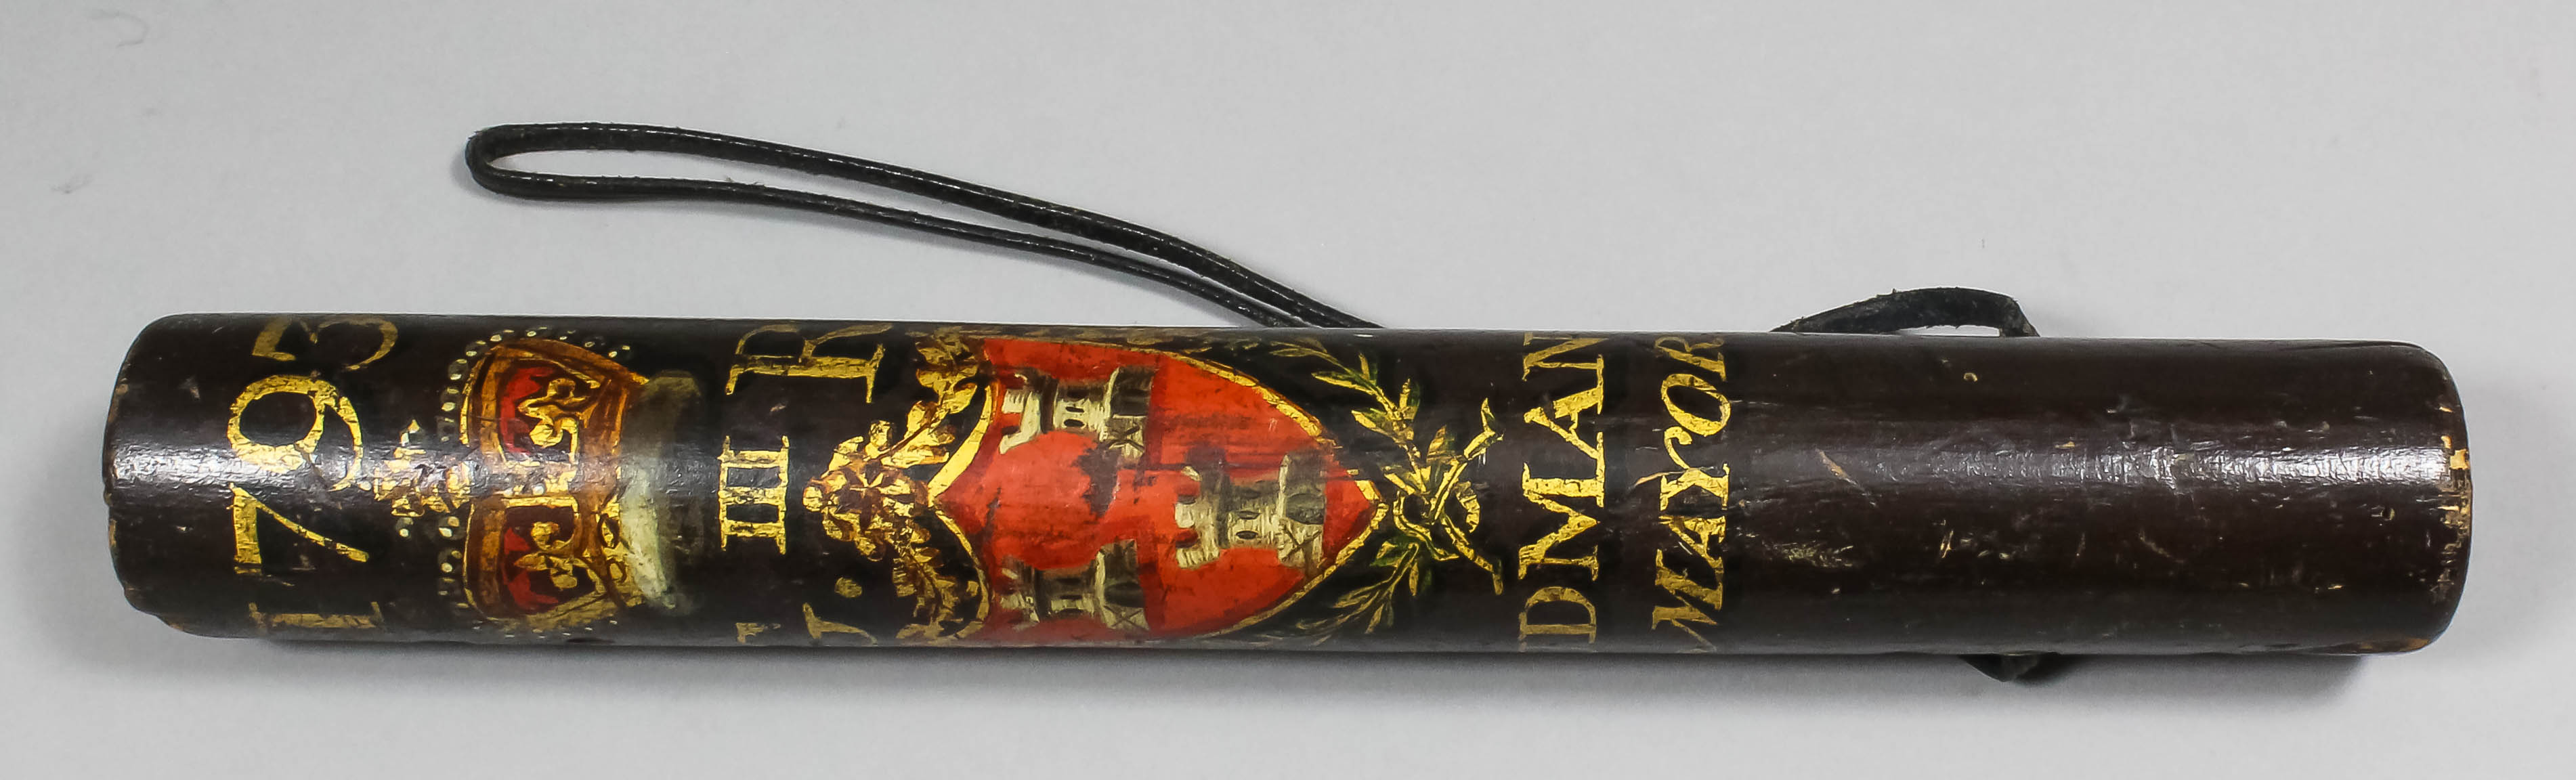 A George III plain wood truncheon or tipstaff painted with date "1793" over a crown with "GR3"